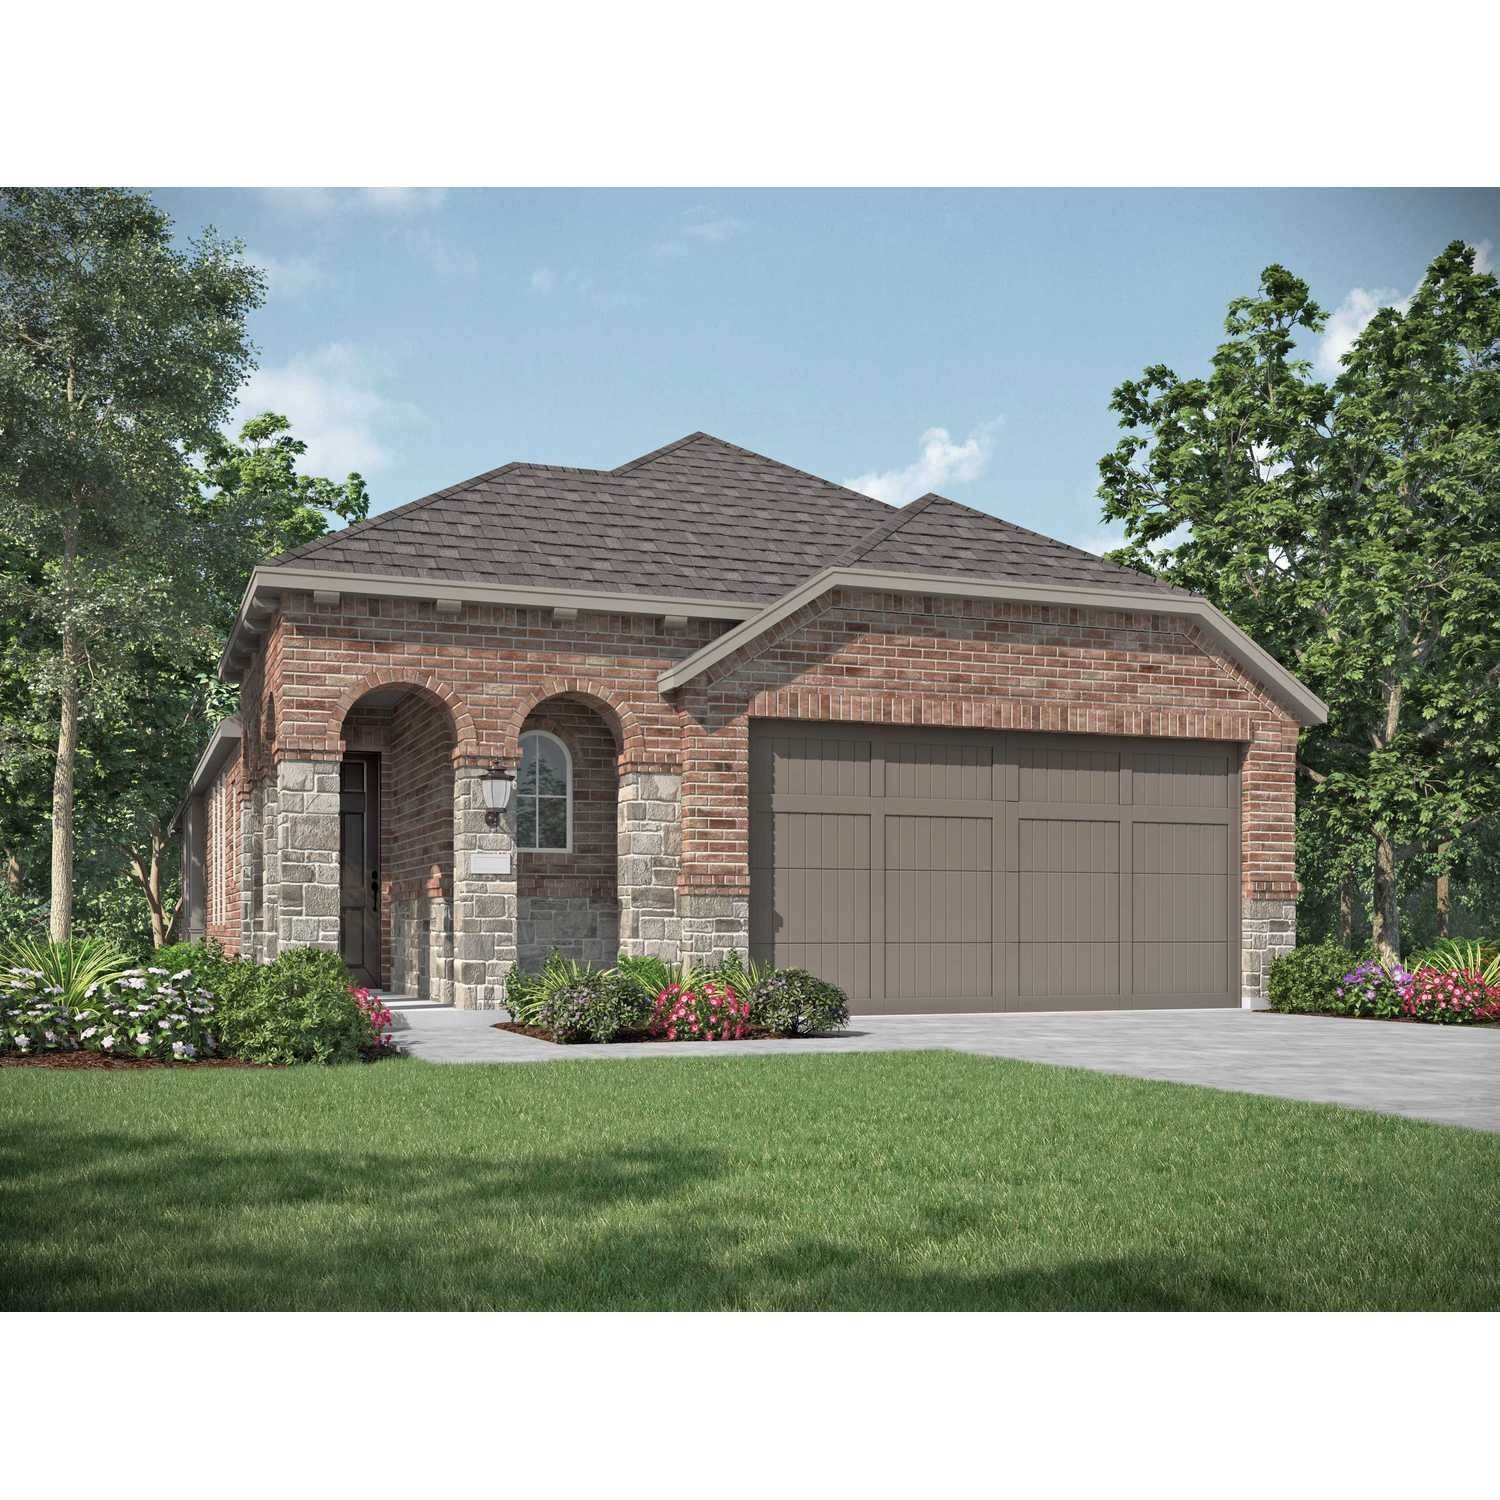 Single Family for Sale at Veramendi: 40' Lots - Front Entry 1810 Nettletree Trail, New Braunfels, TX 78132